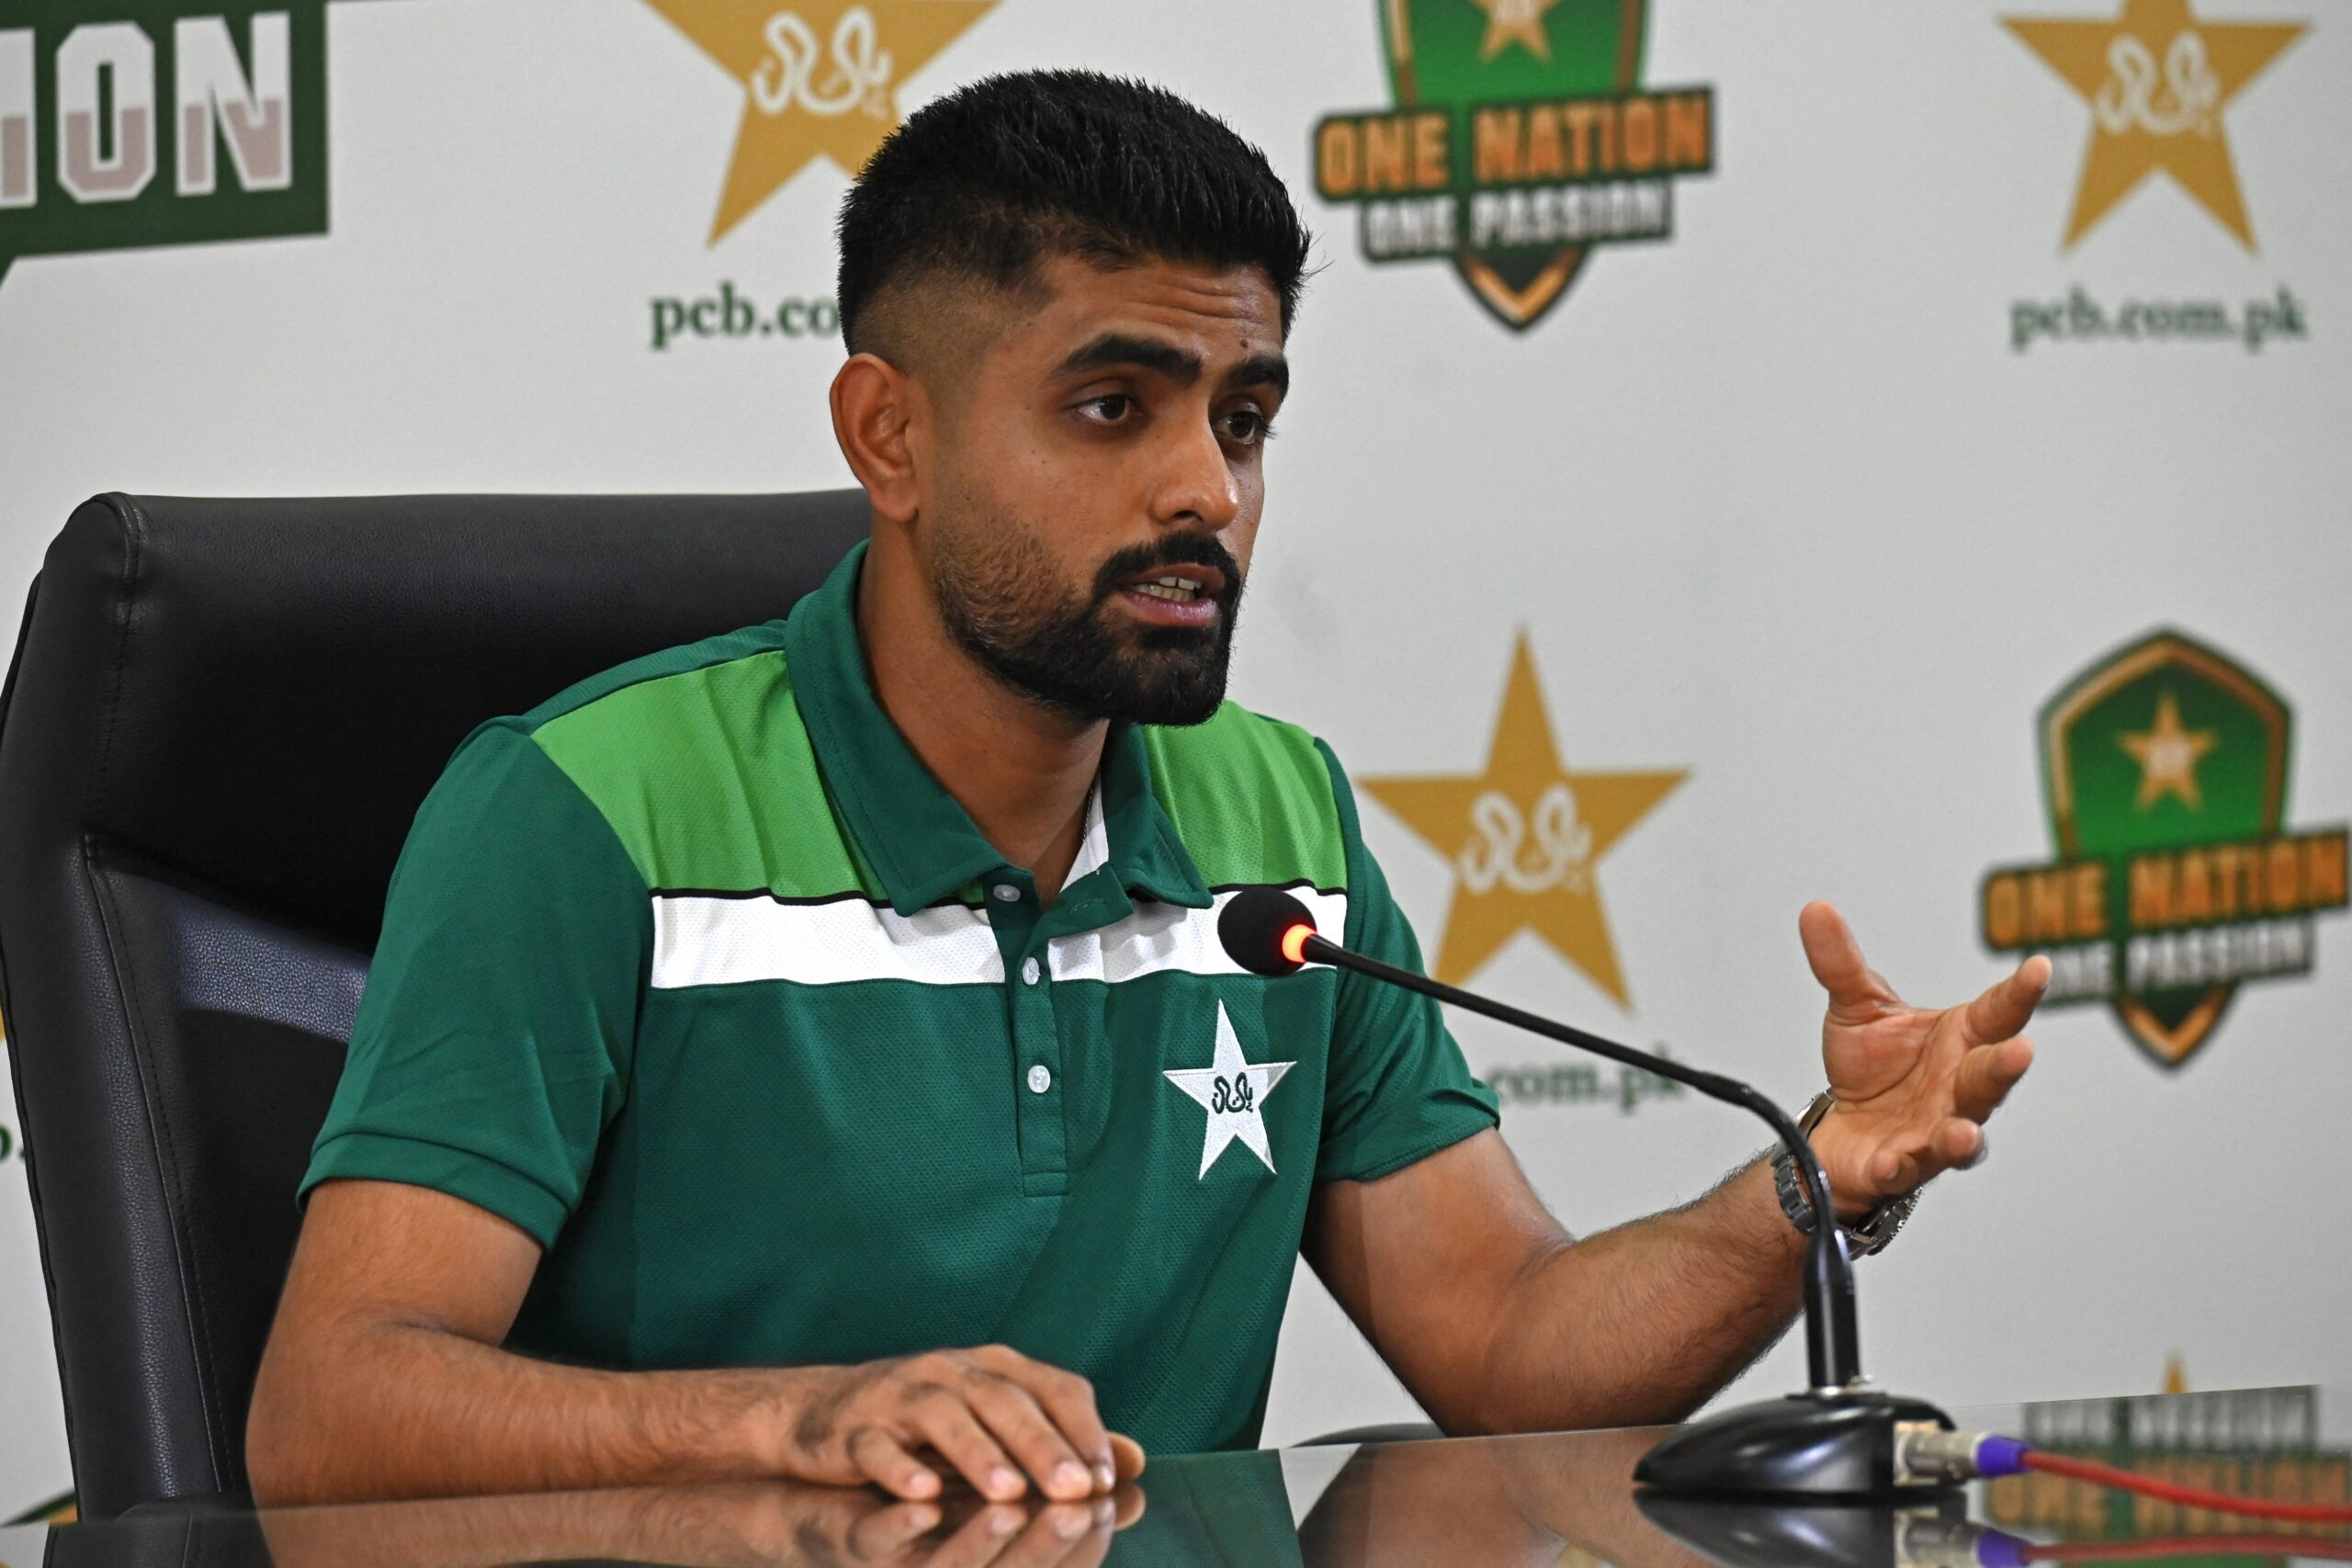 “Don’t Focus On The Past”: Babar Azam’s Blunt Take On Pakistan’s Cricket World Cup Record vs India